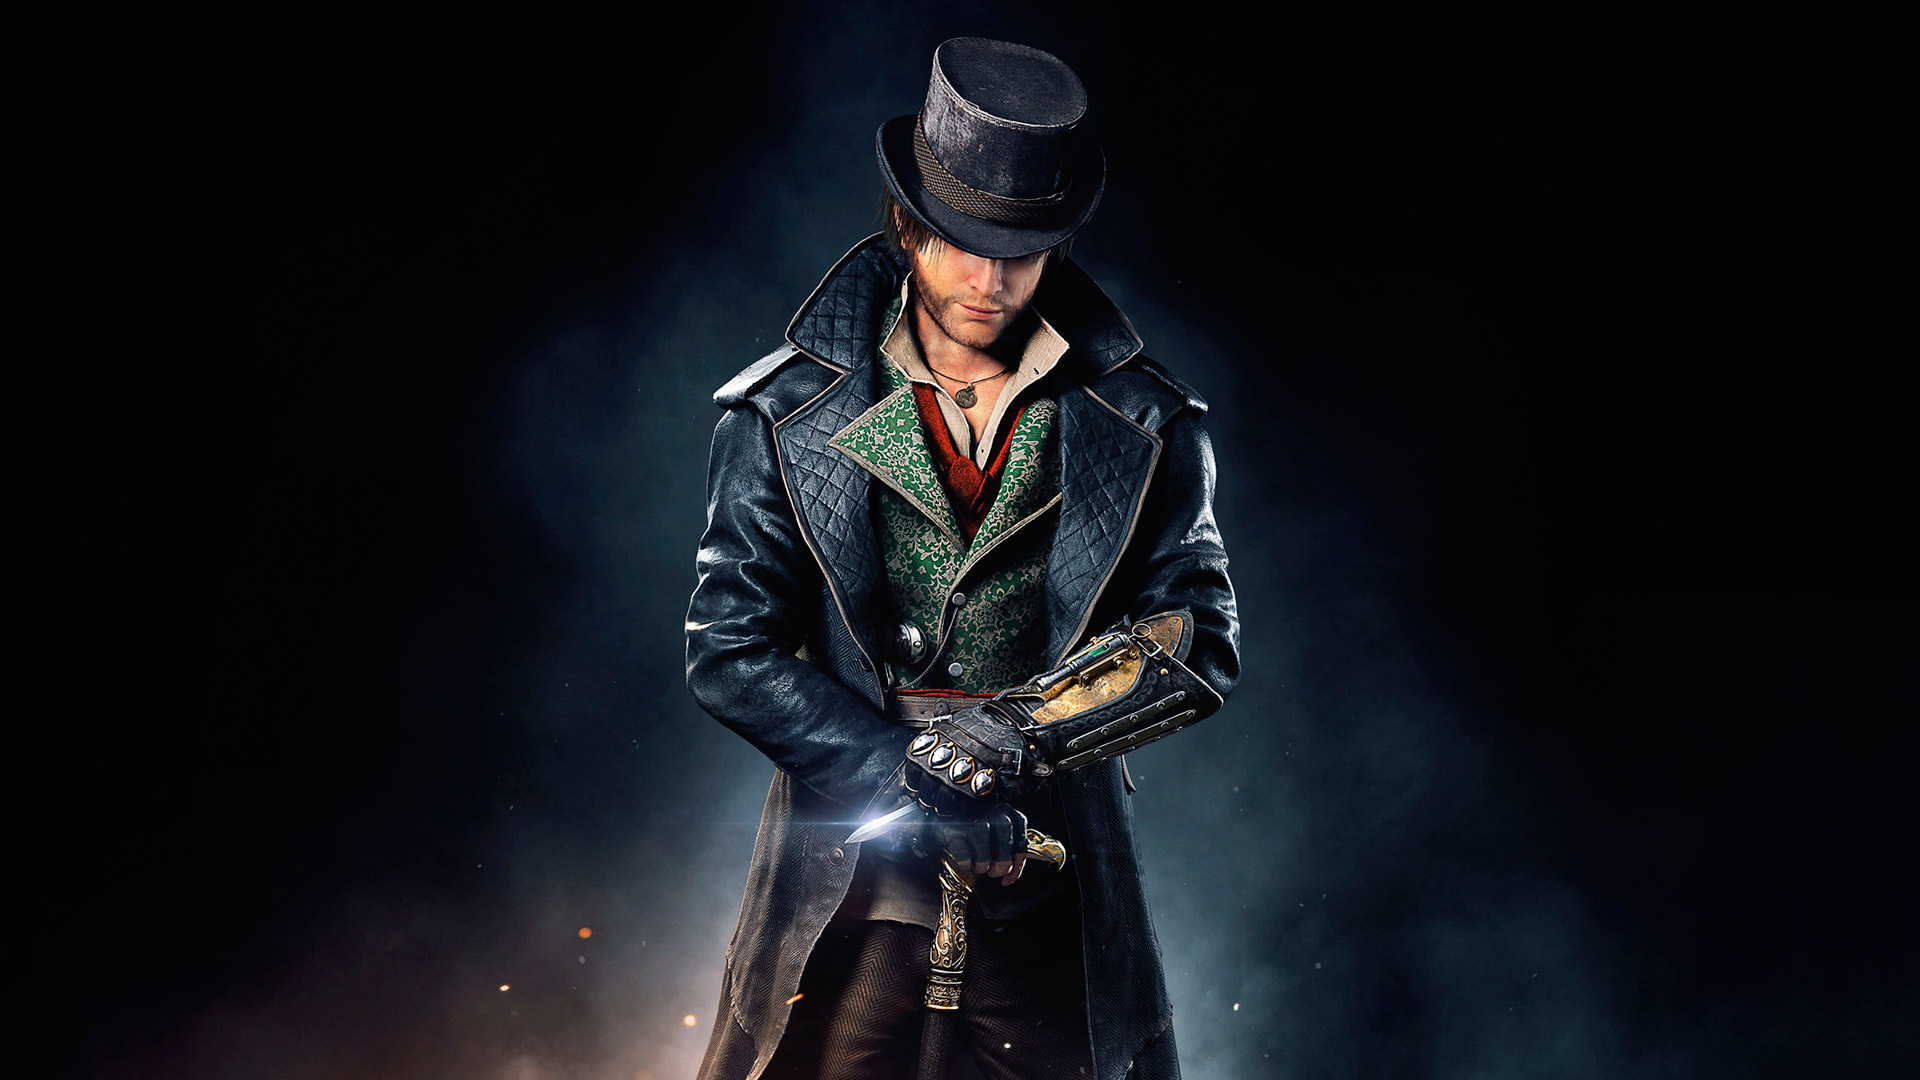 Free Assassins Creed Syndicate Wallpaper in 1920x1080 1920x1080